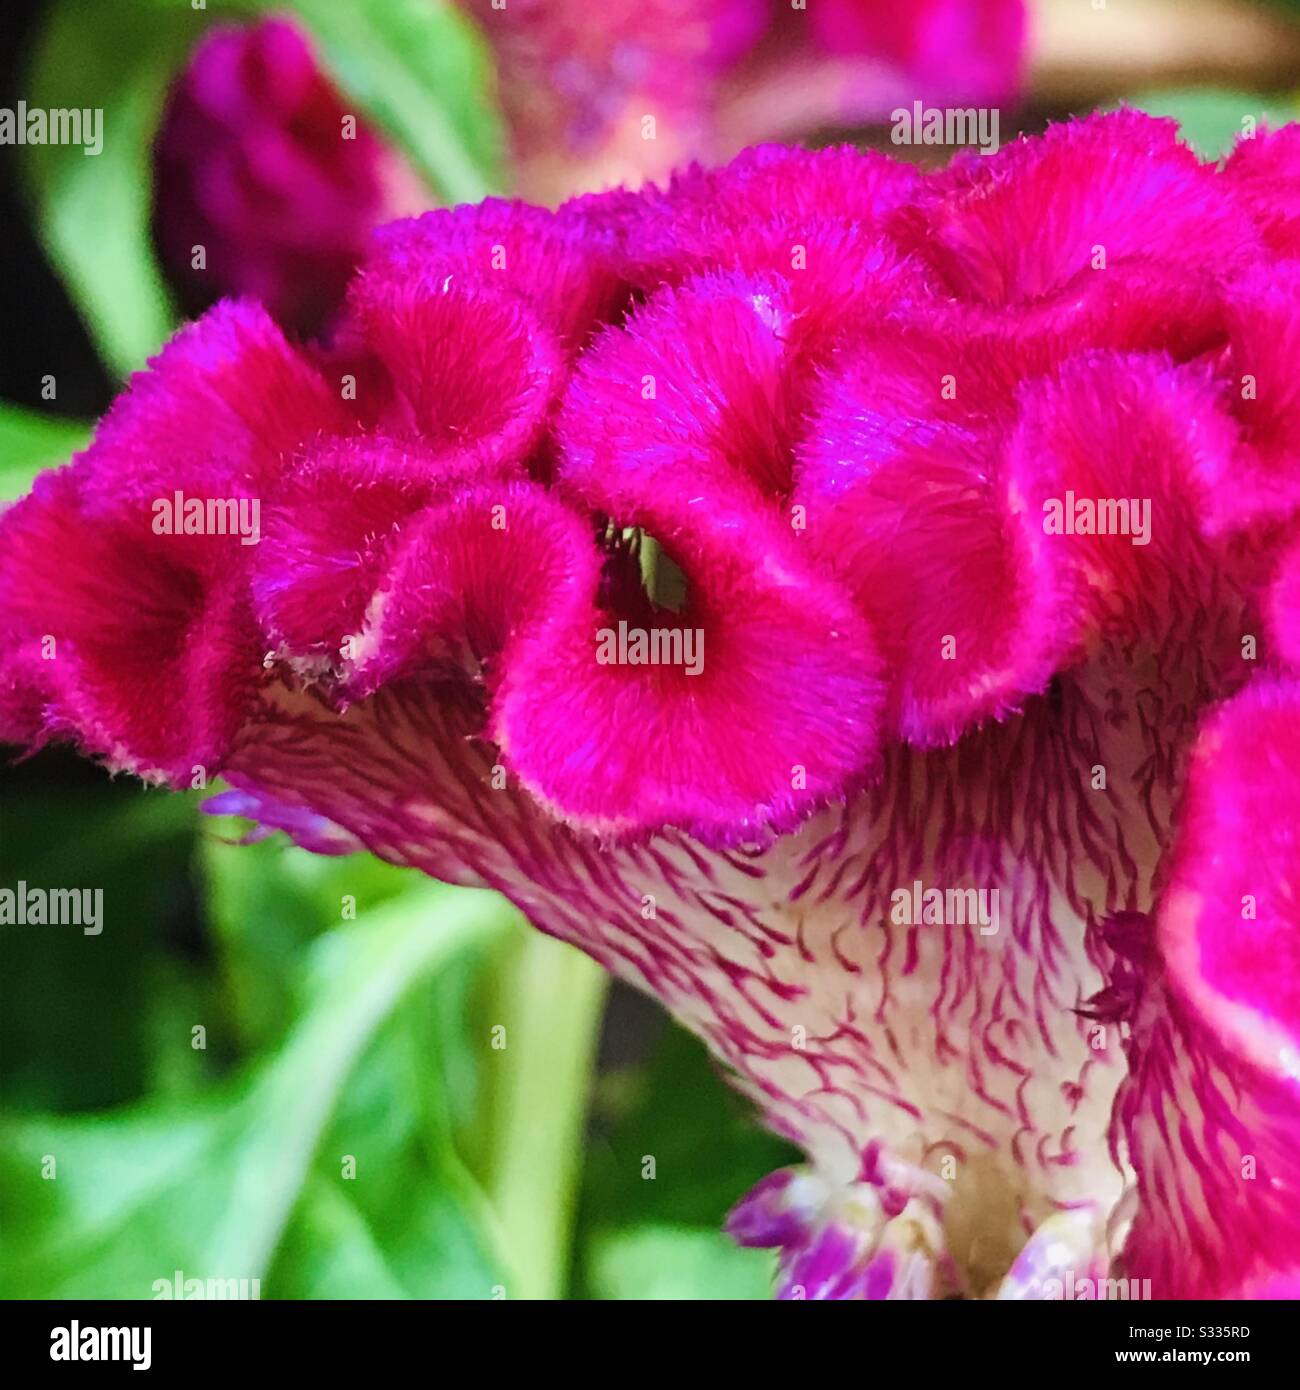 Celosia argentea var. Cristata aka cockscomb - pink colour flower looks like the head on a rooster an ornamental plant,Kozhichutta in Malayalam - close up image of Magenta flower- velvet flower Stock Photo